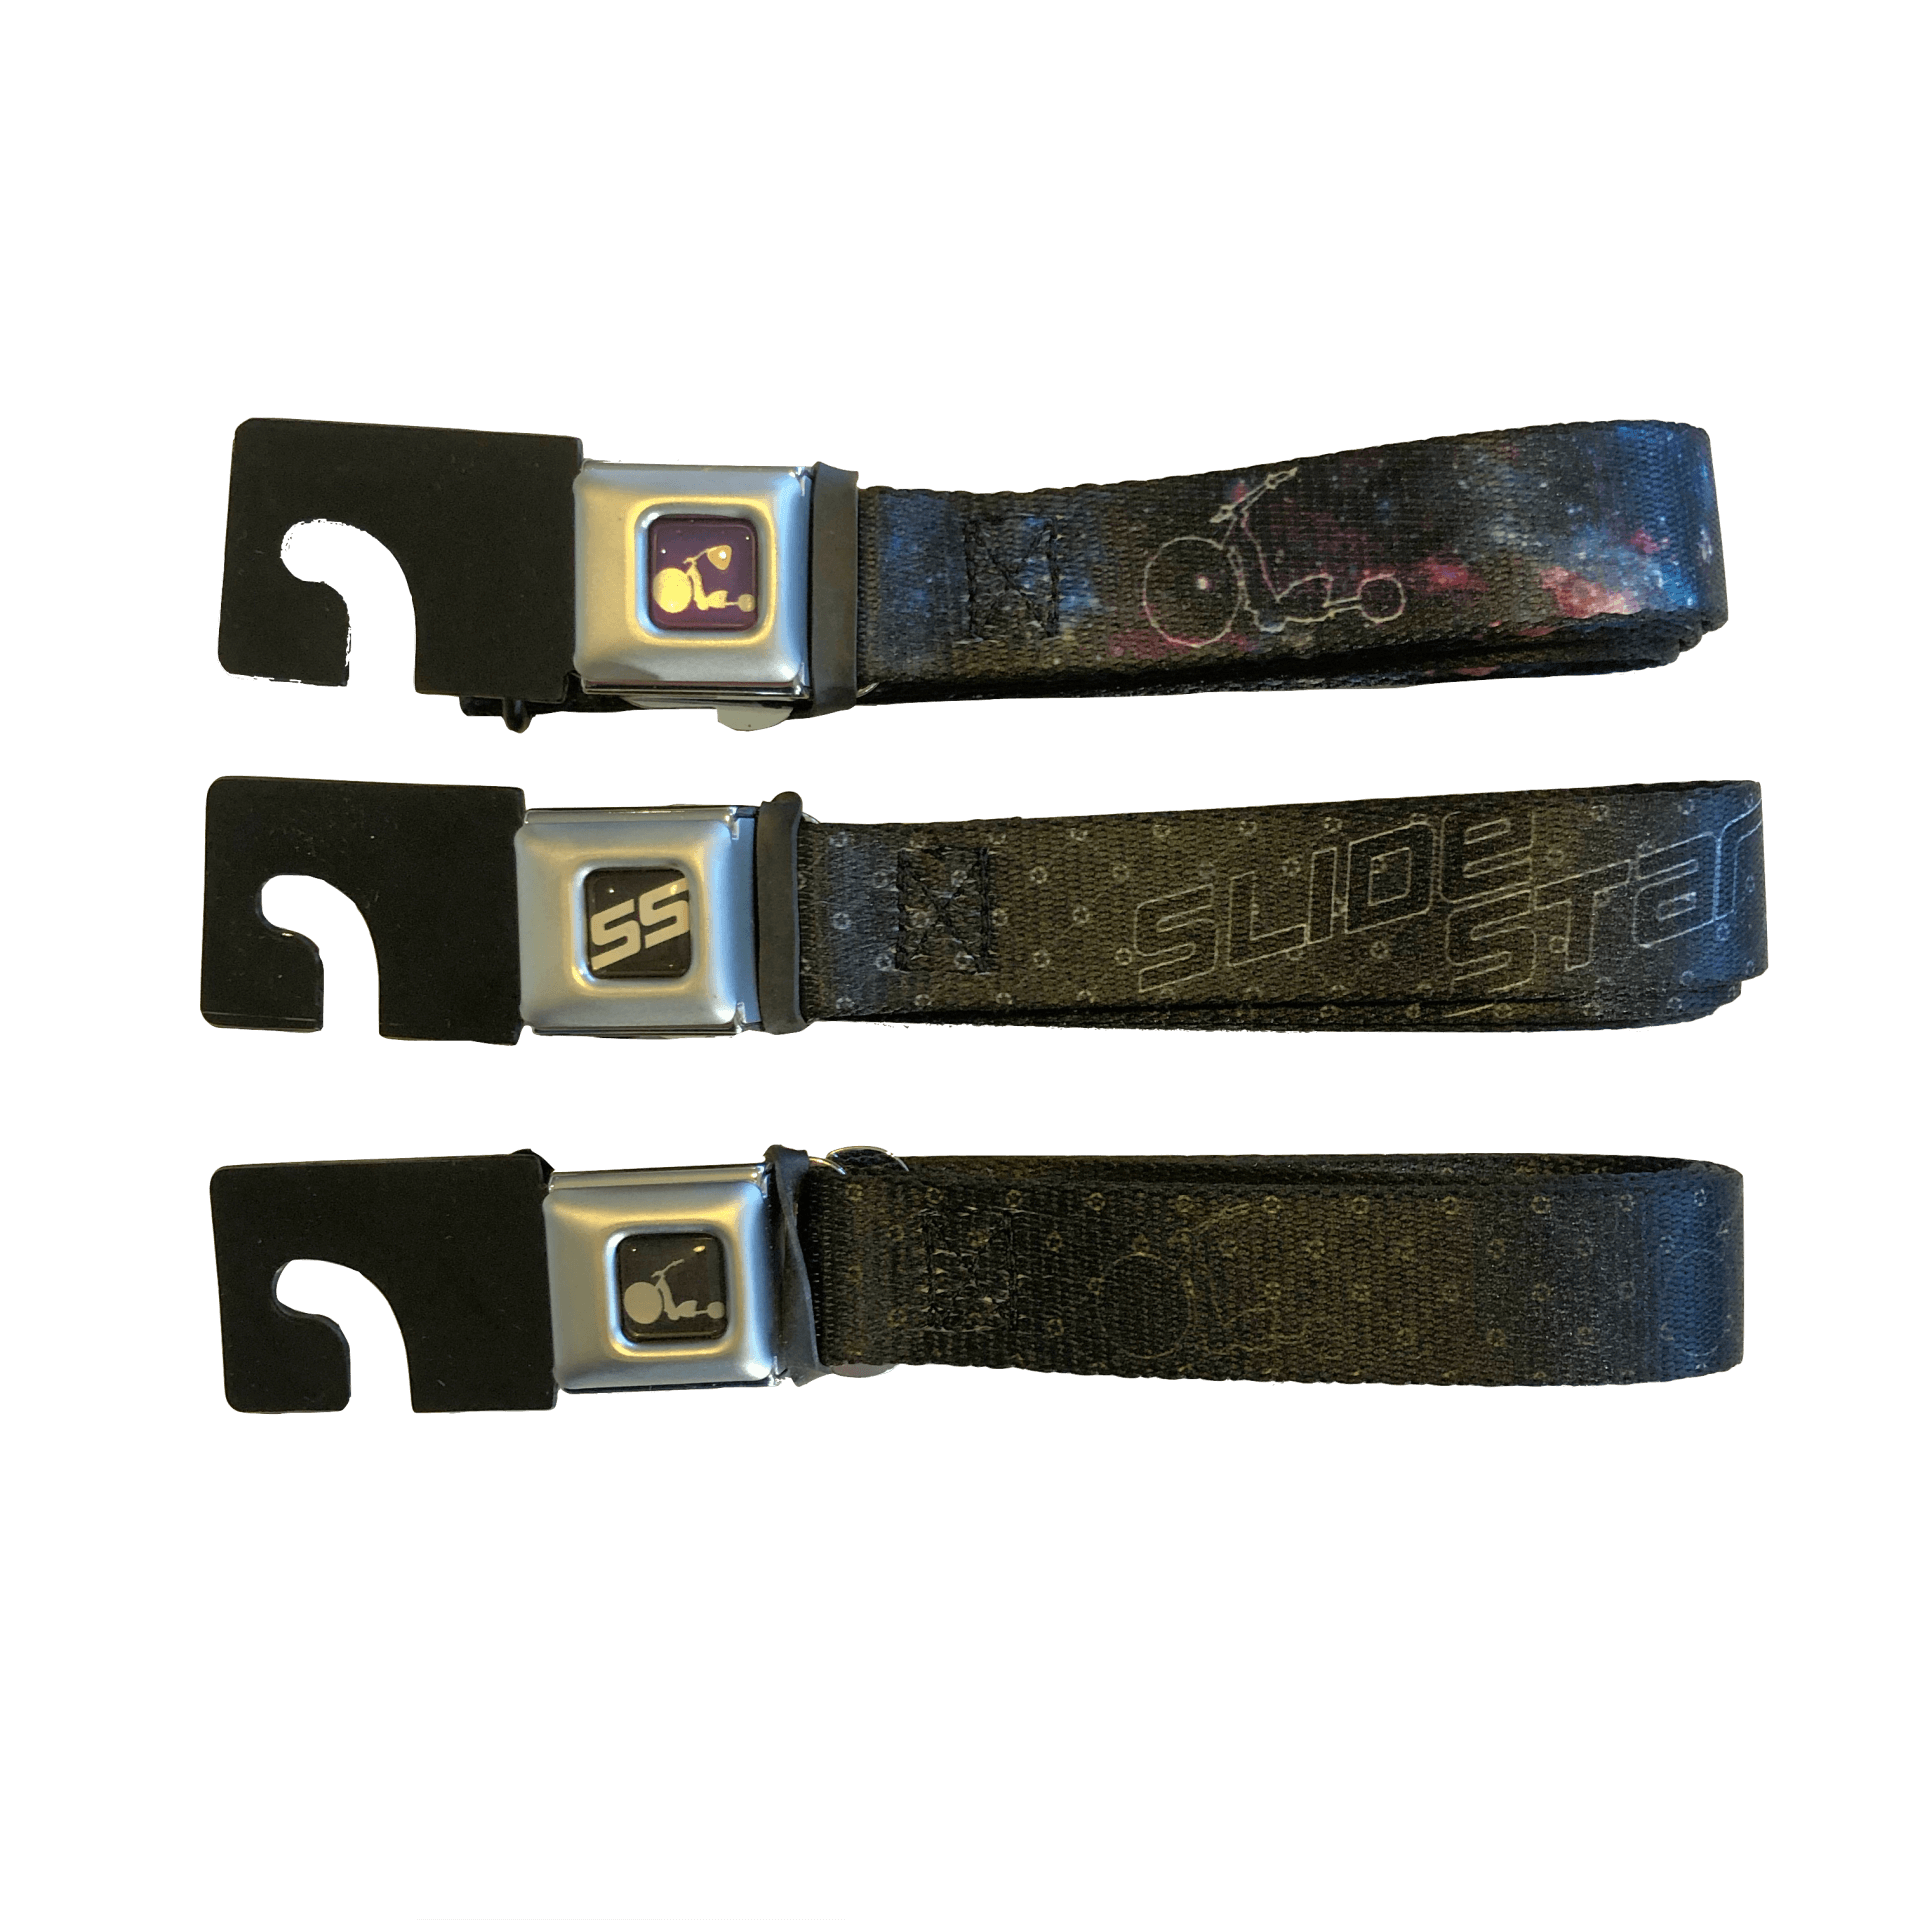  Buckle-Down Seatbelt Belt - Magikarp Monogram Blue - 1.0 Wide  - 20-36 Inches in Length : Clothing, Shoes & Jewelry